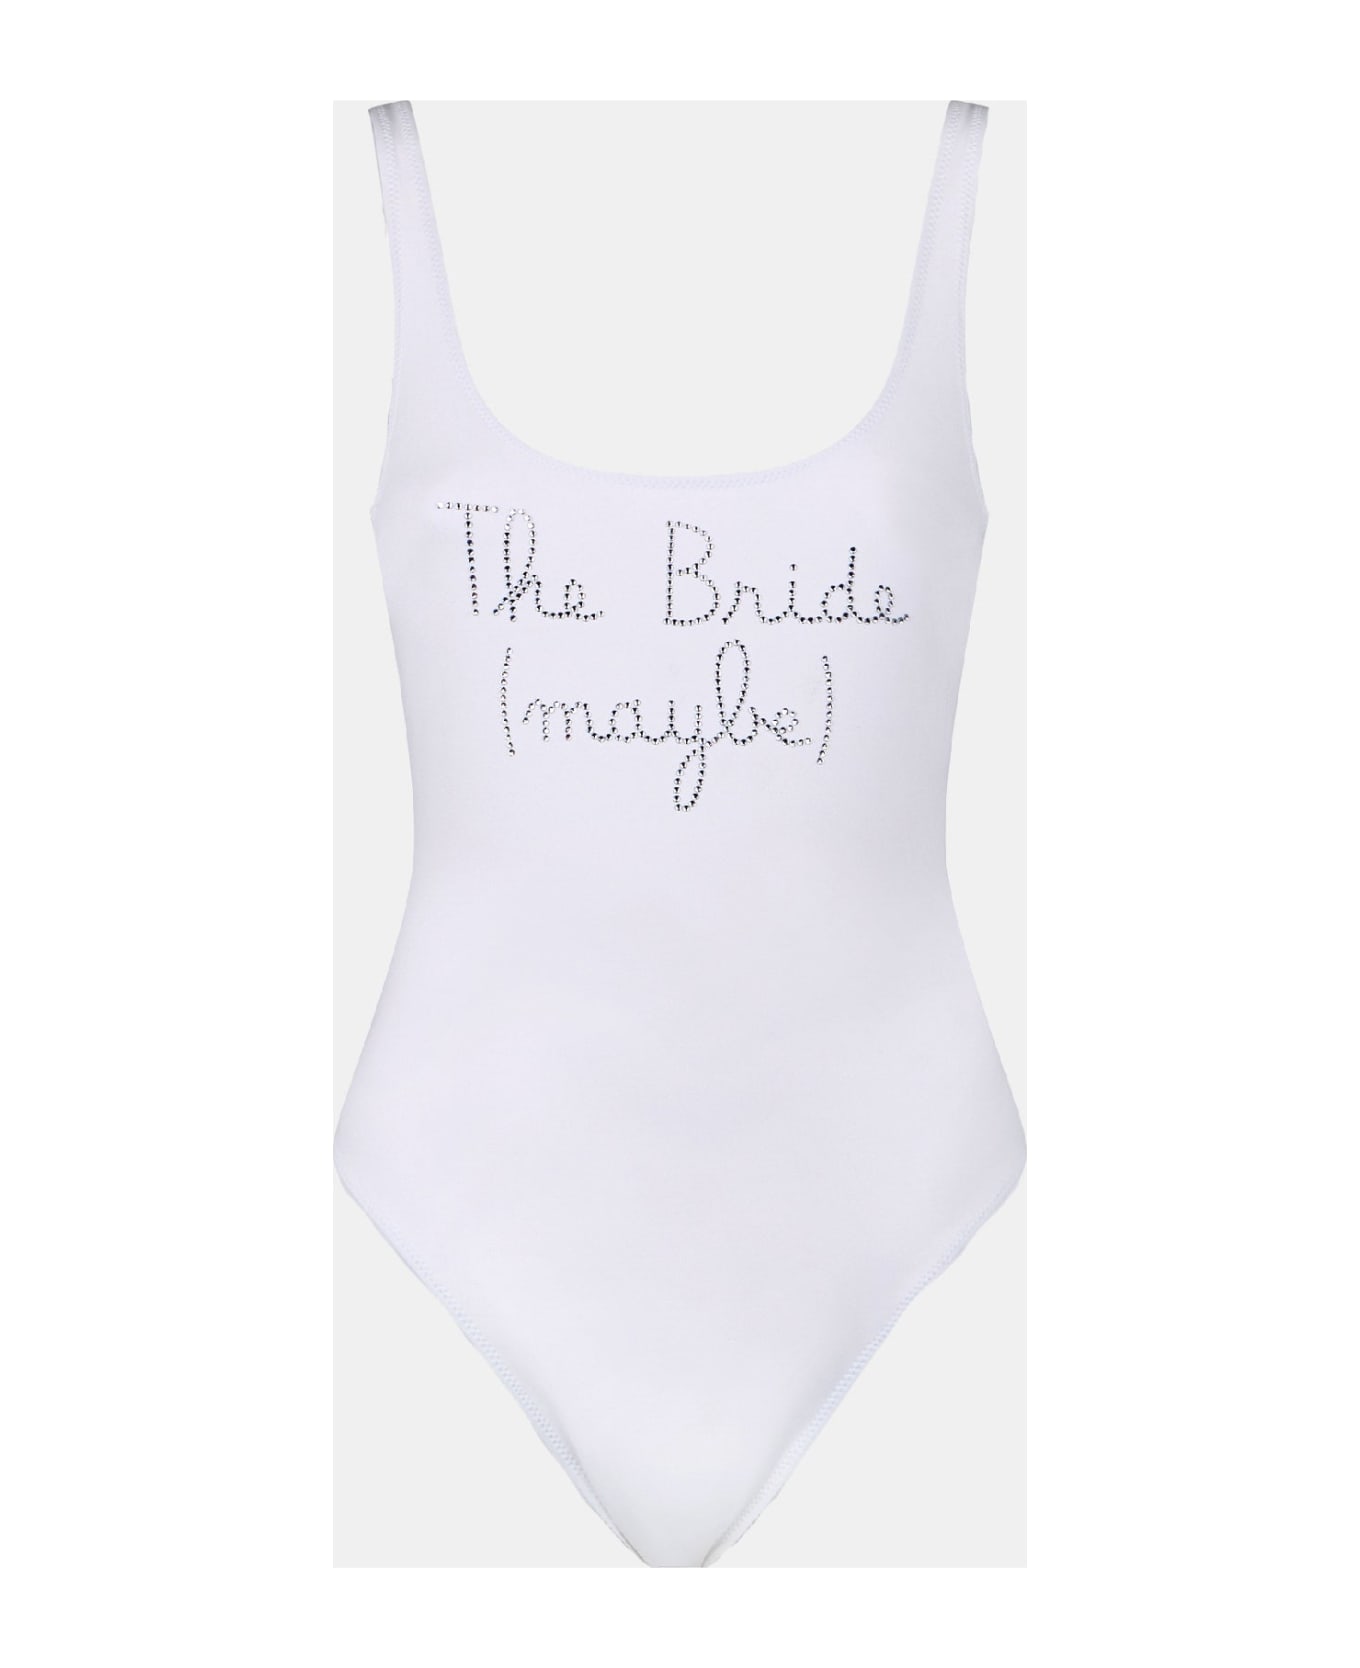 MC2 Saint Barth Woman One Piece Swimsuit With The Bride Maybe Rhinestone Embroidery - WHITE ワンピース